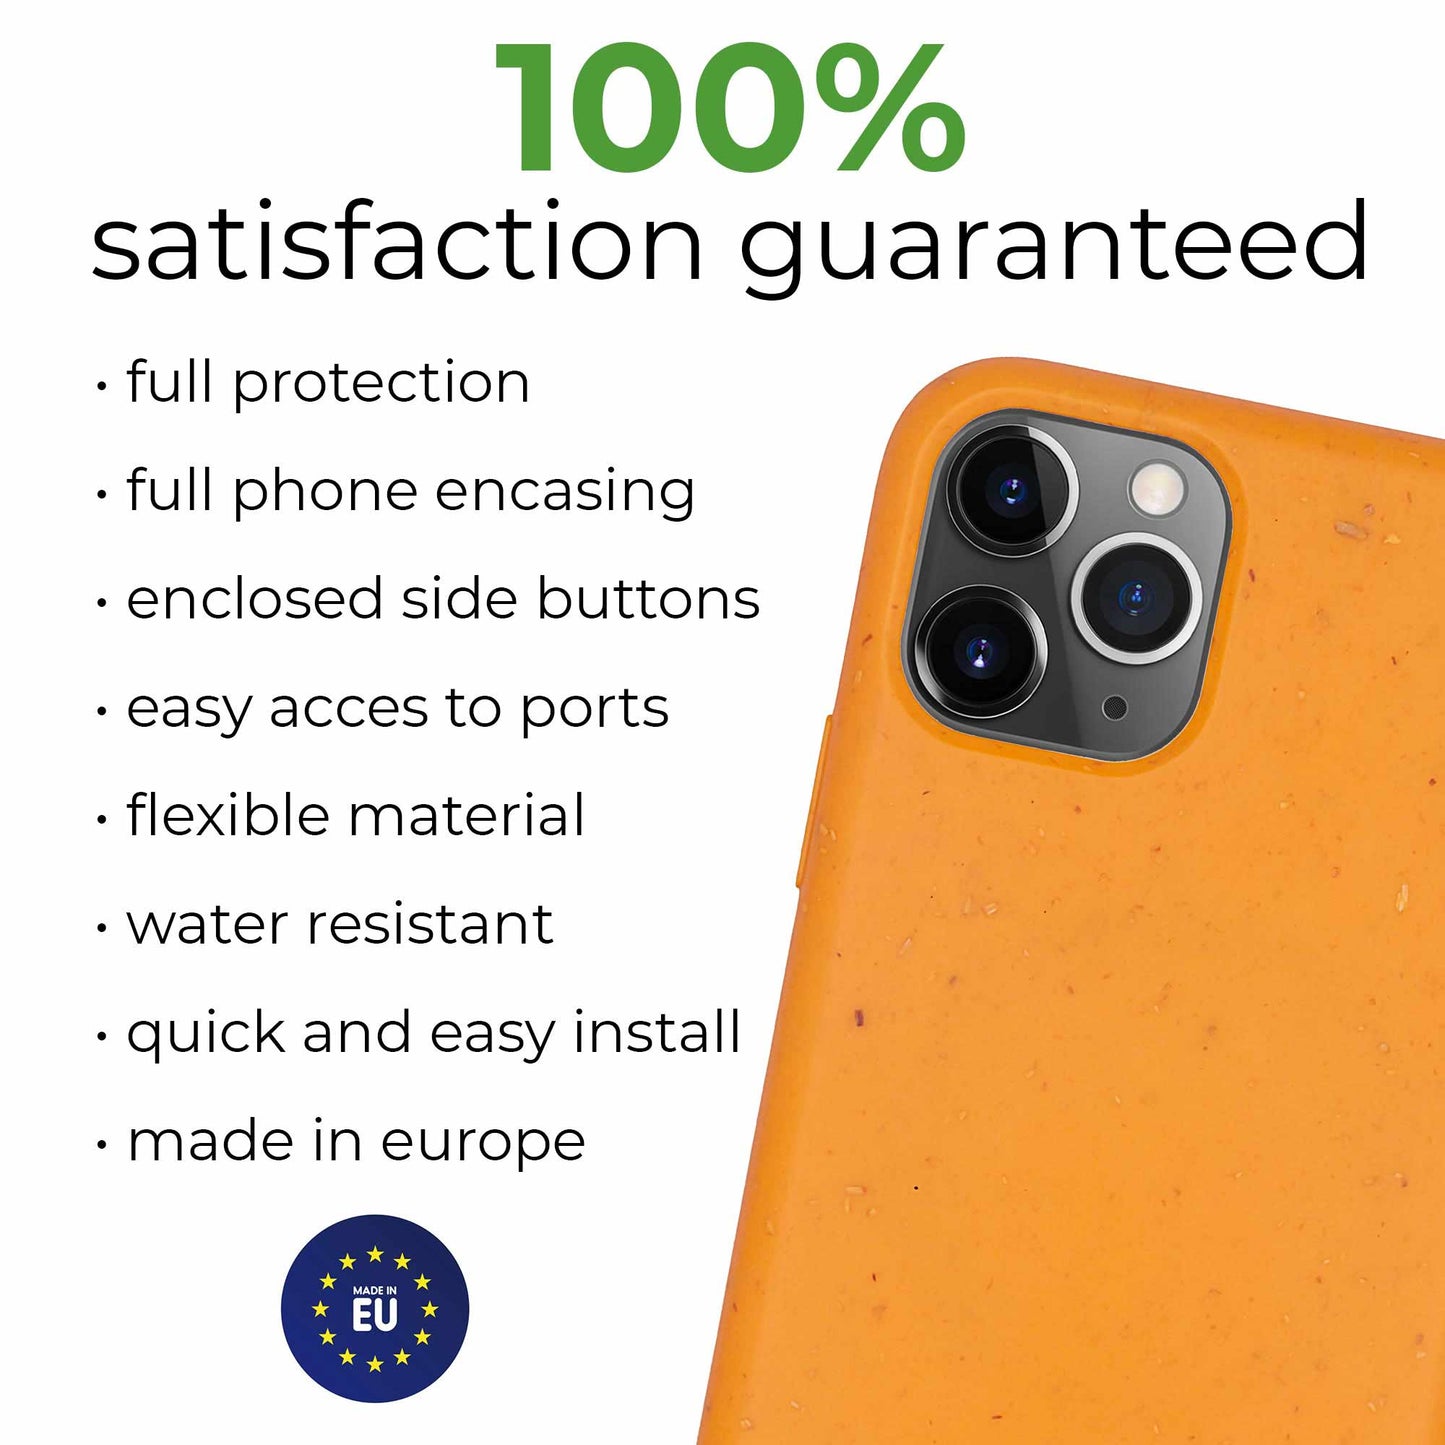 Customizable Eco-Friendly Biodegradable Phone Case, Orange - Personalized Text Engraving